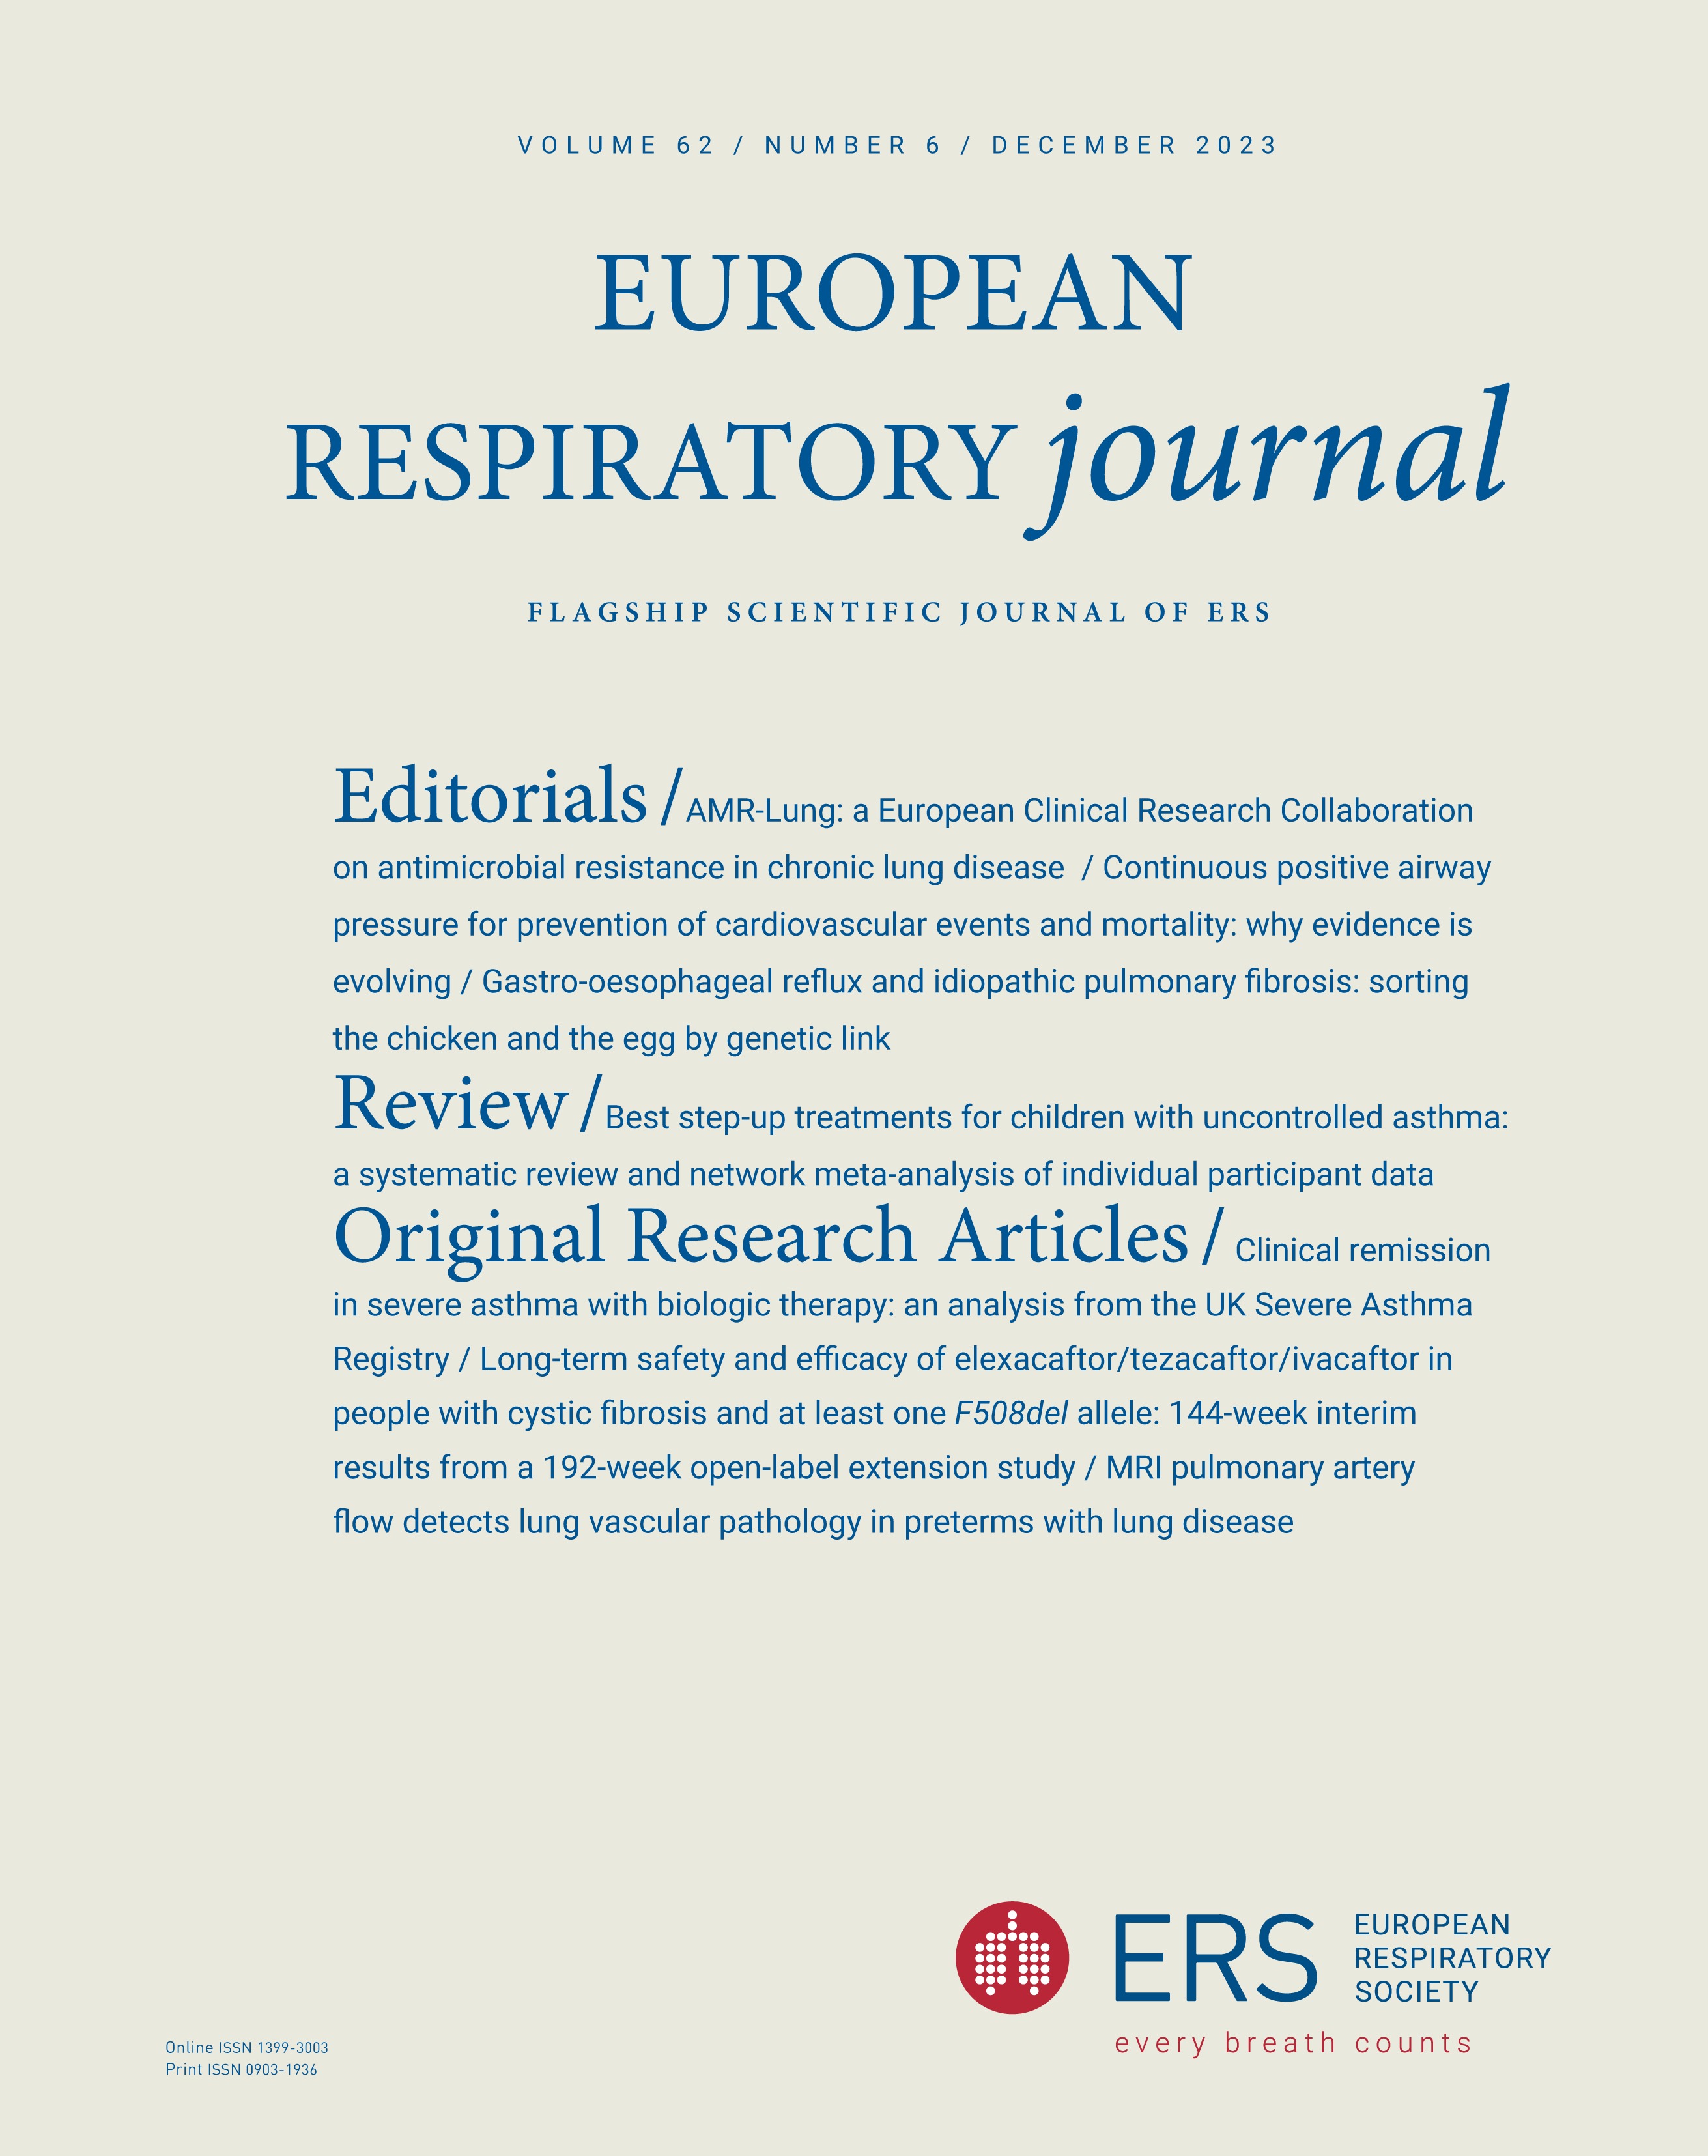 European Respiratory Society statement on novel nicotine and tobacco products, their role in tobacco control and "harm reduction"